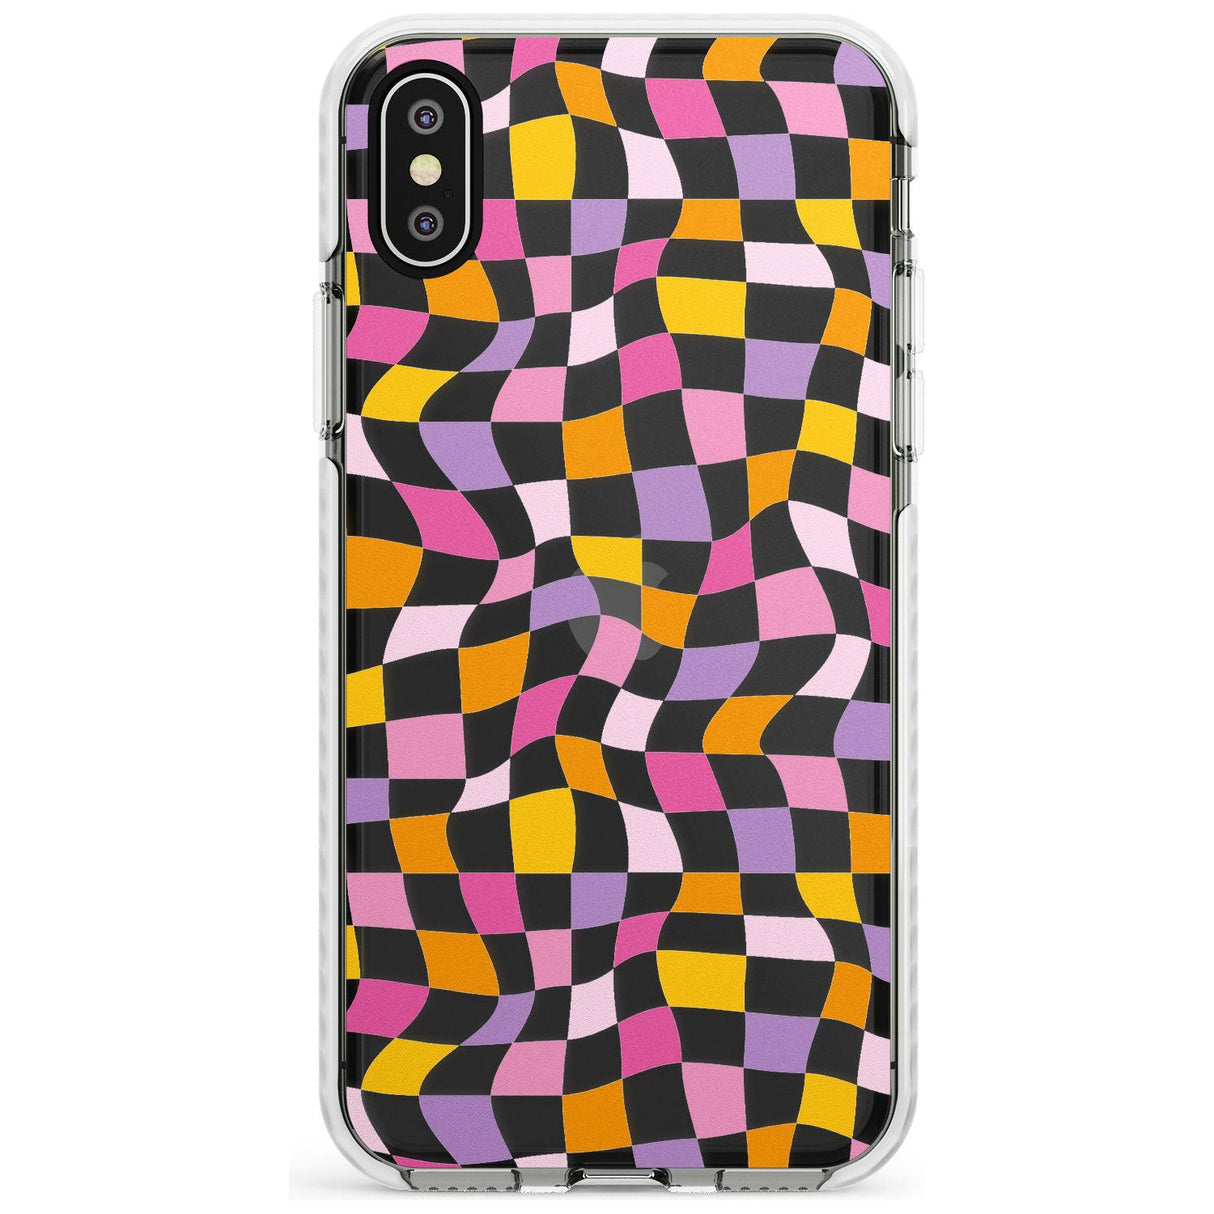 Wonky Squares Pattern Impact Phone Case for iPhone X XS Max XR